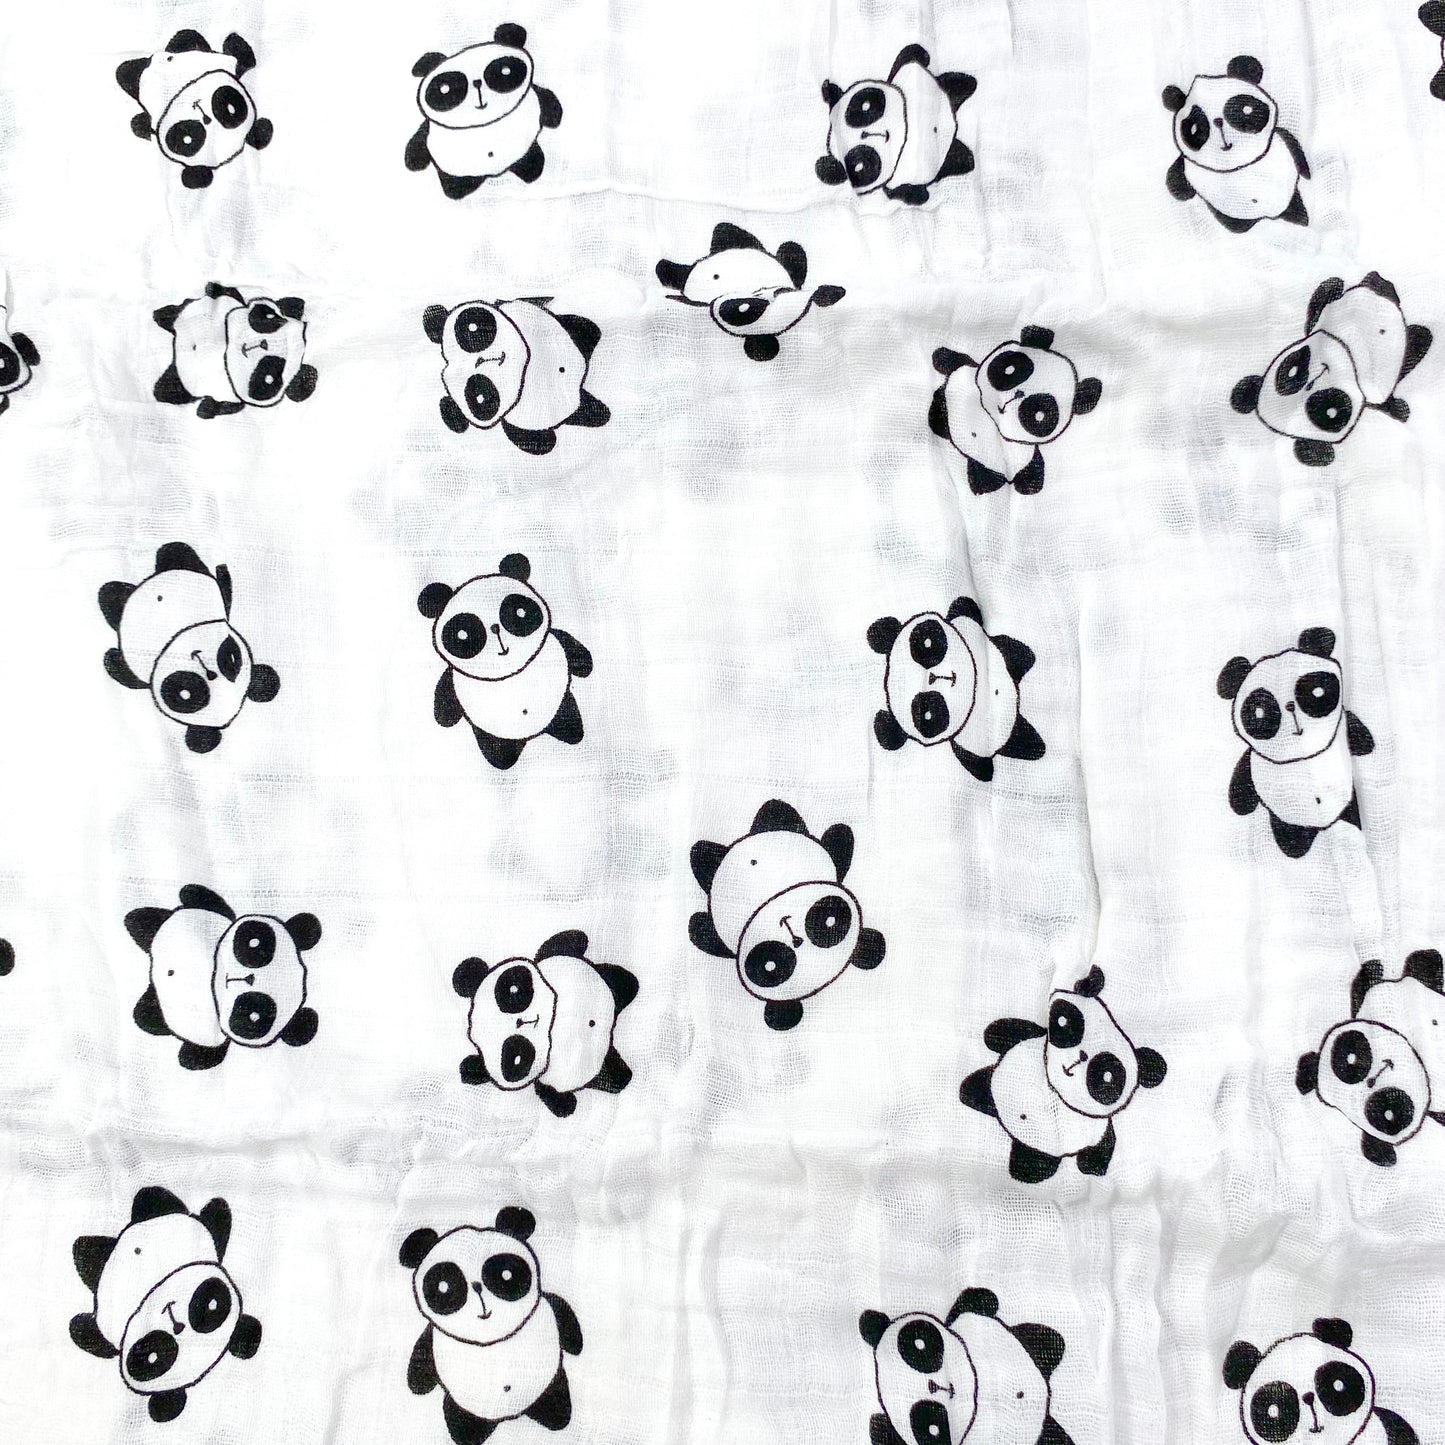 Close up pattern of a muslin swaddle blanket with a panda design.